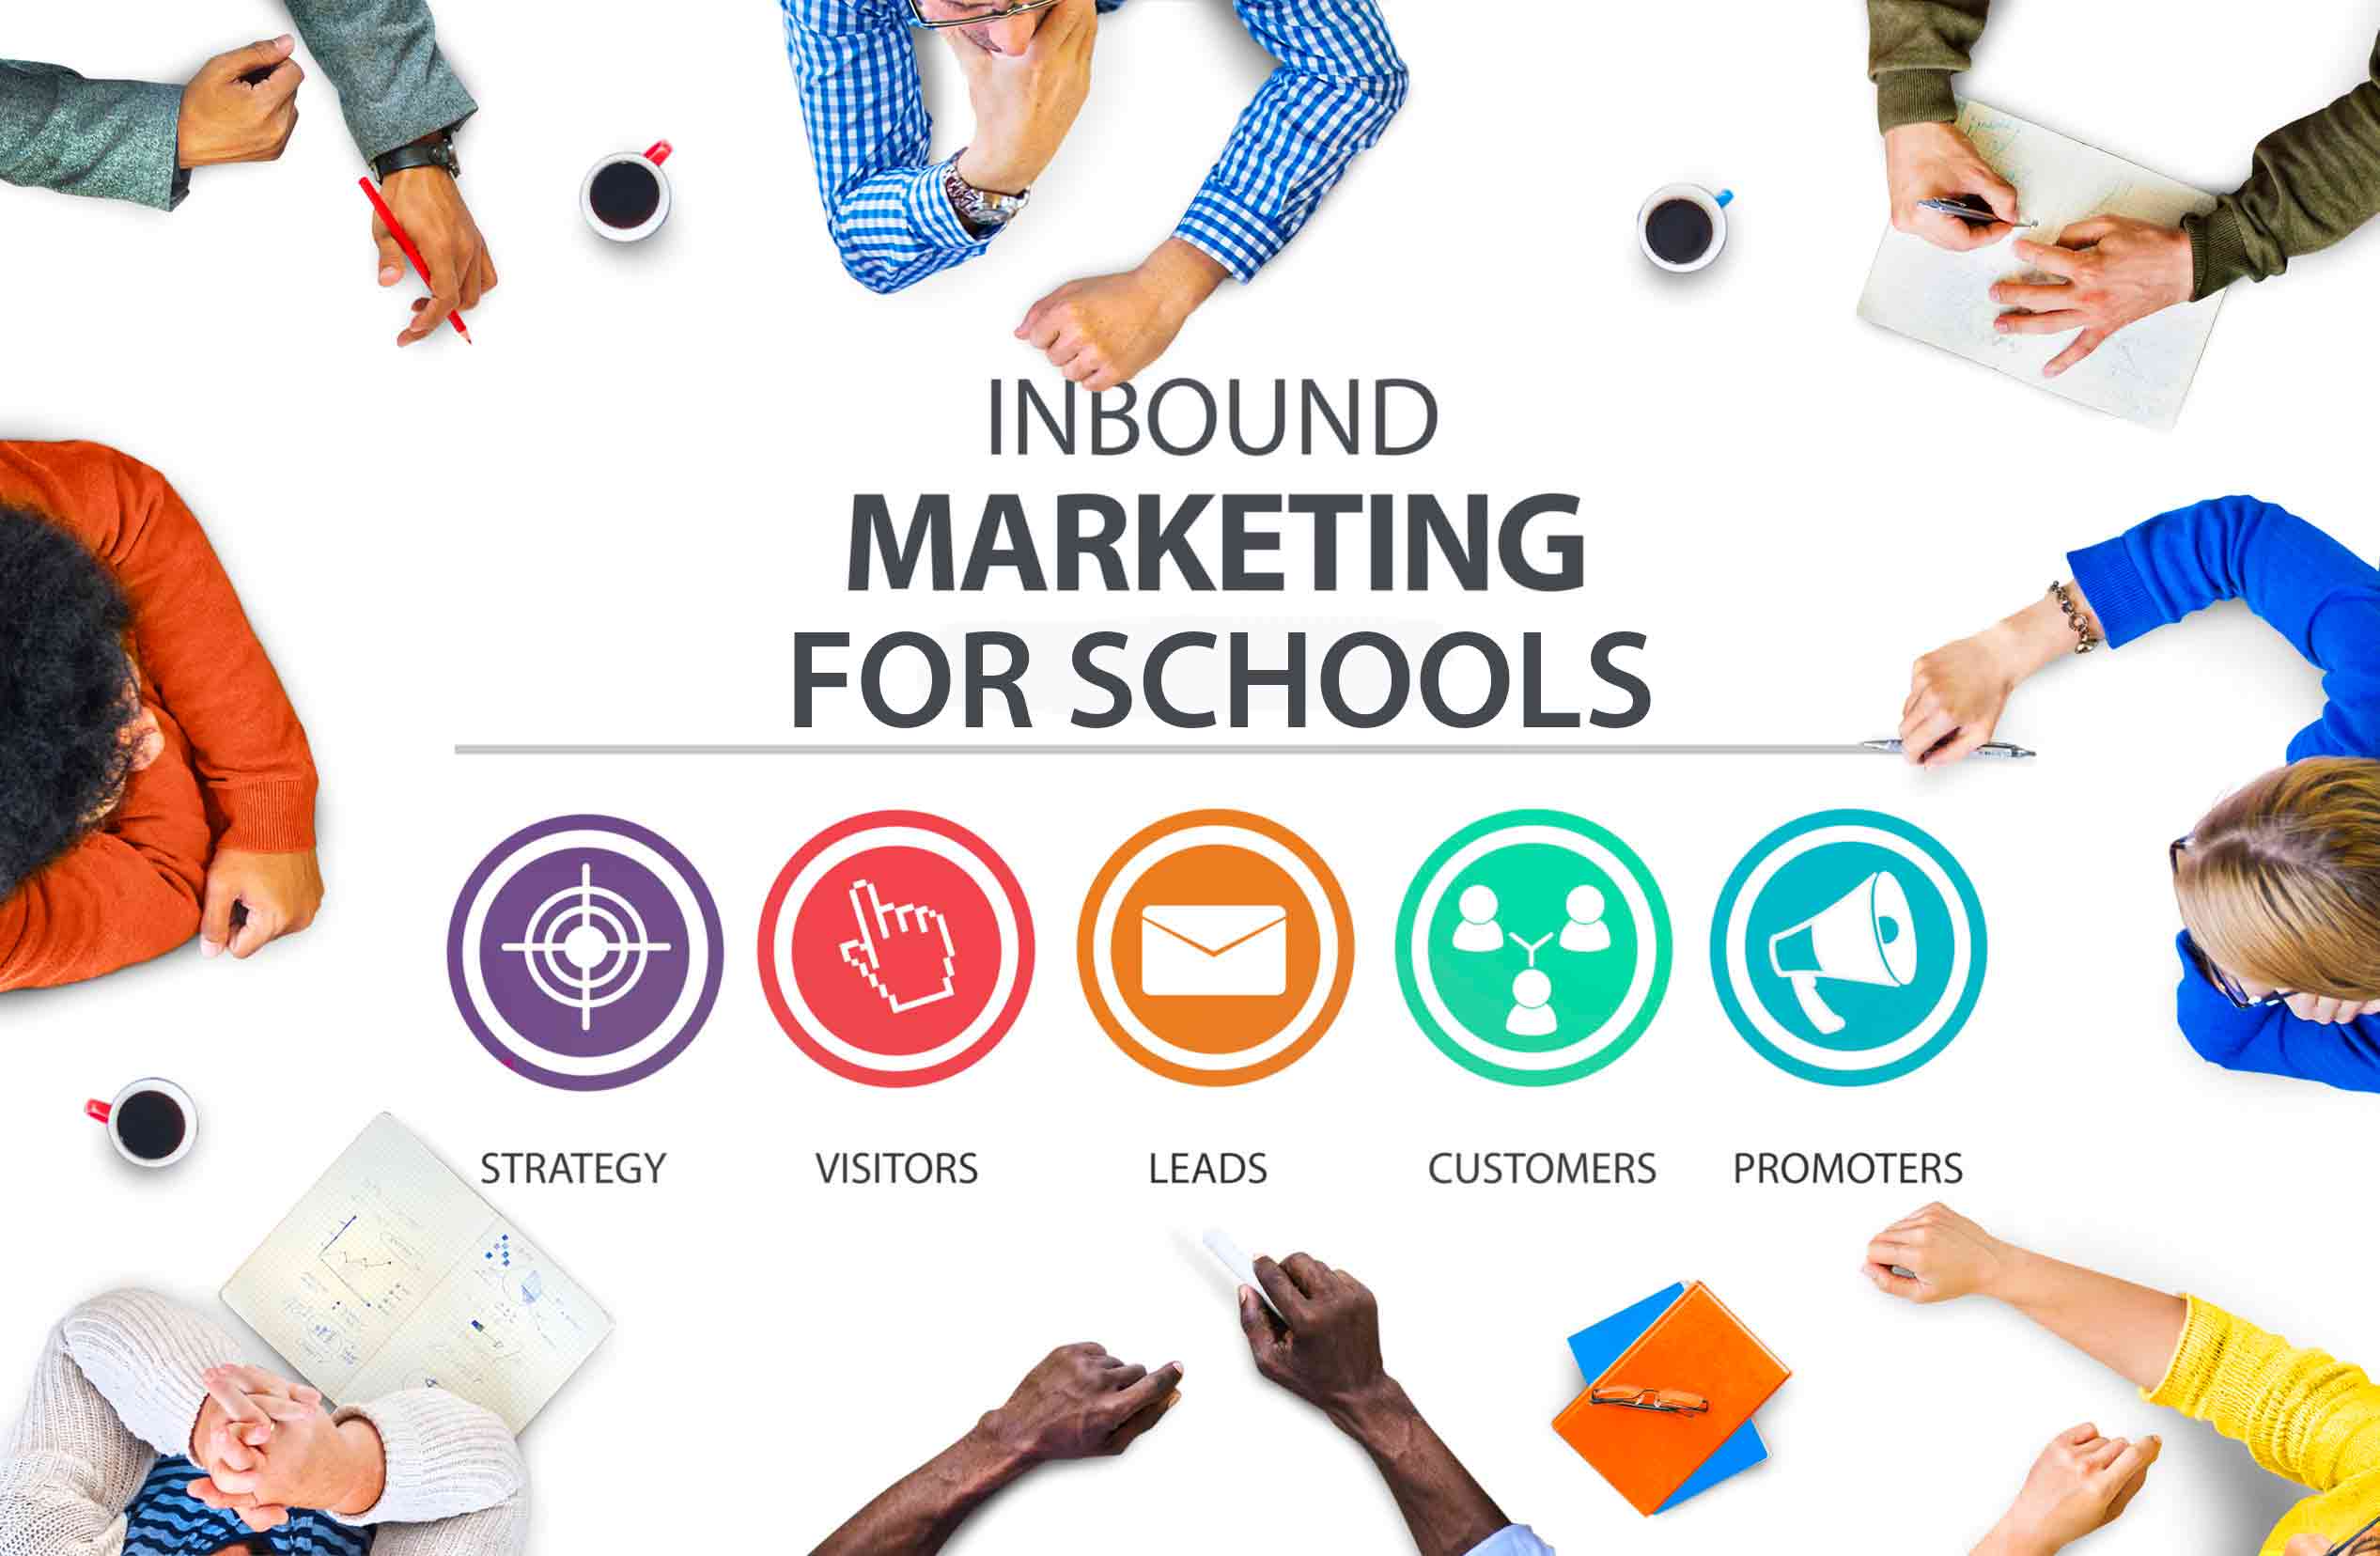 Want to Increase Student Enrollment? 5 Inbound Marketing Tips for Colleges